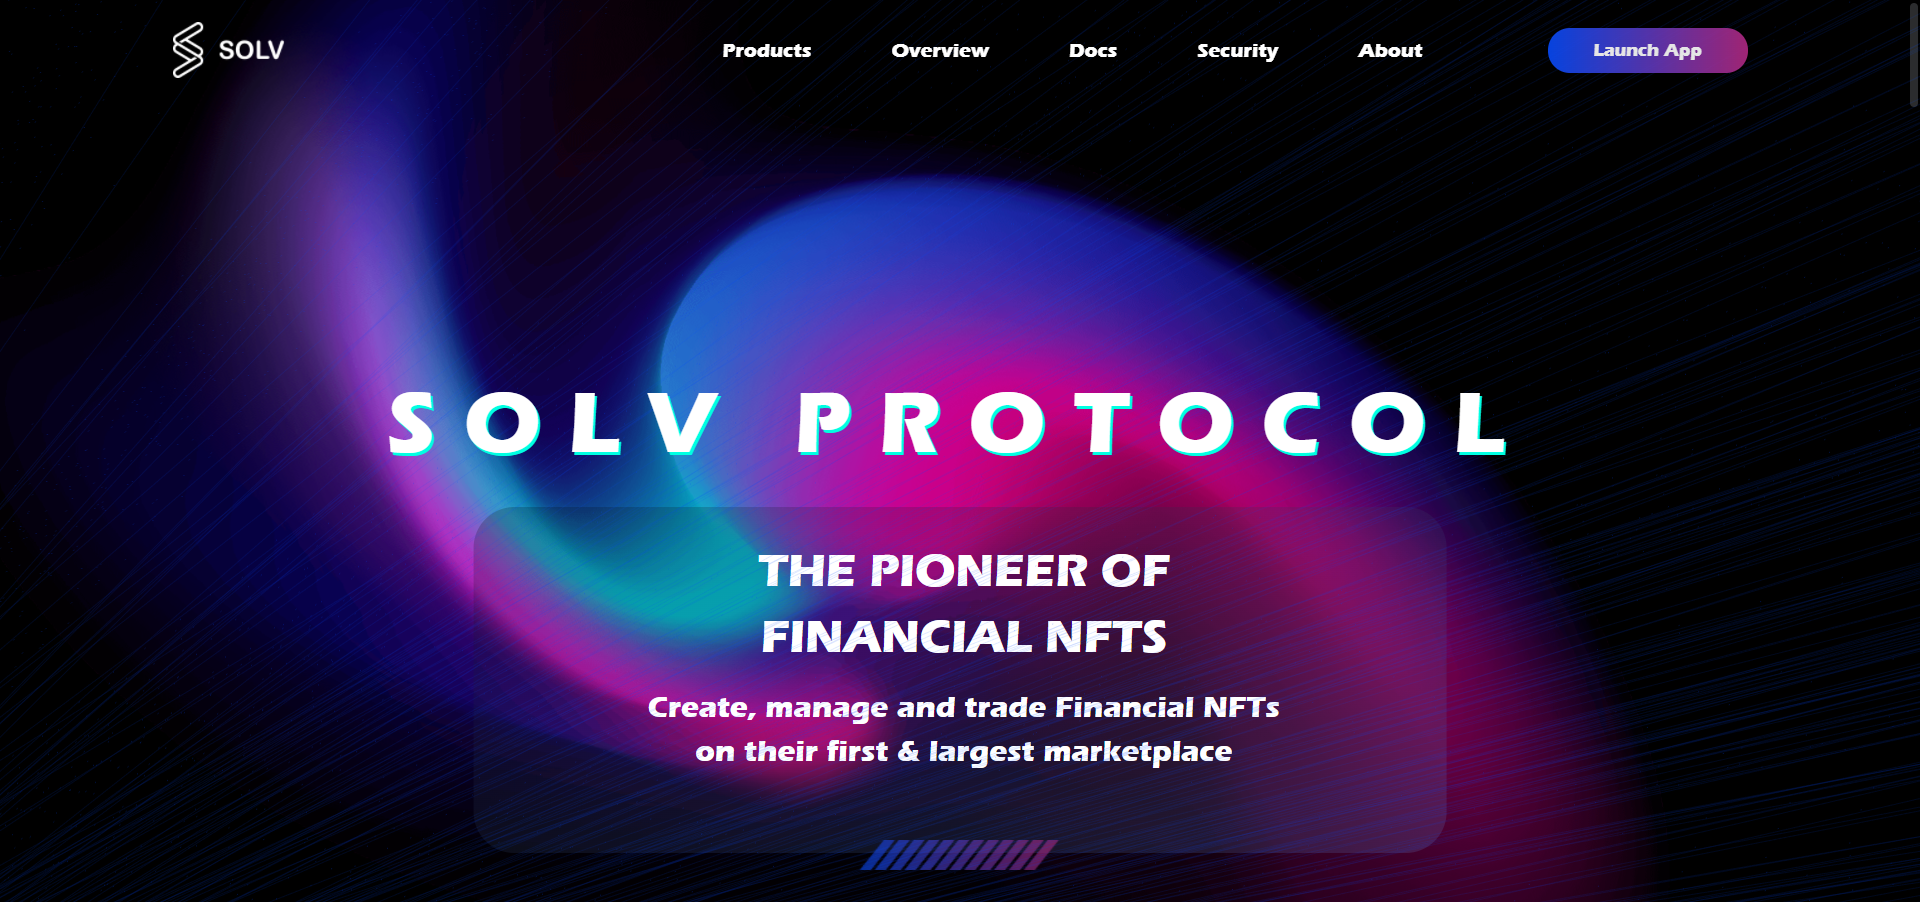 Solv Protocol concludes fundraising with $4 mln raised